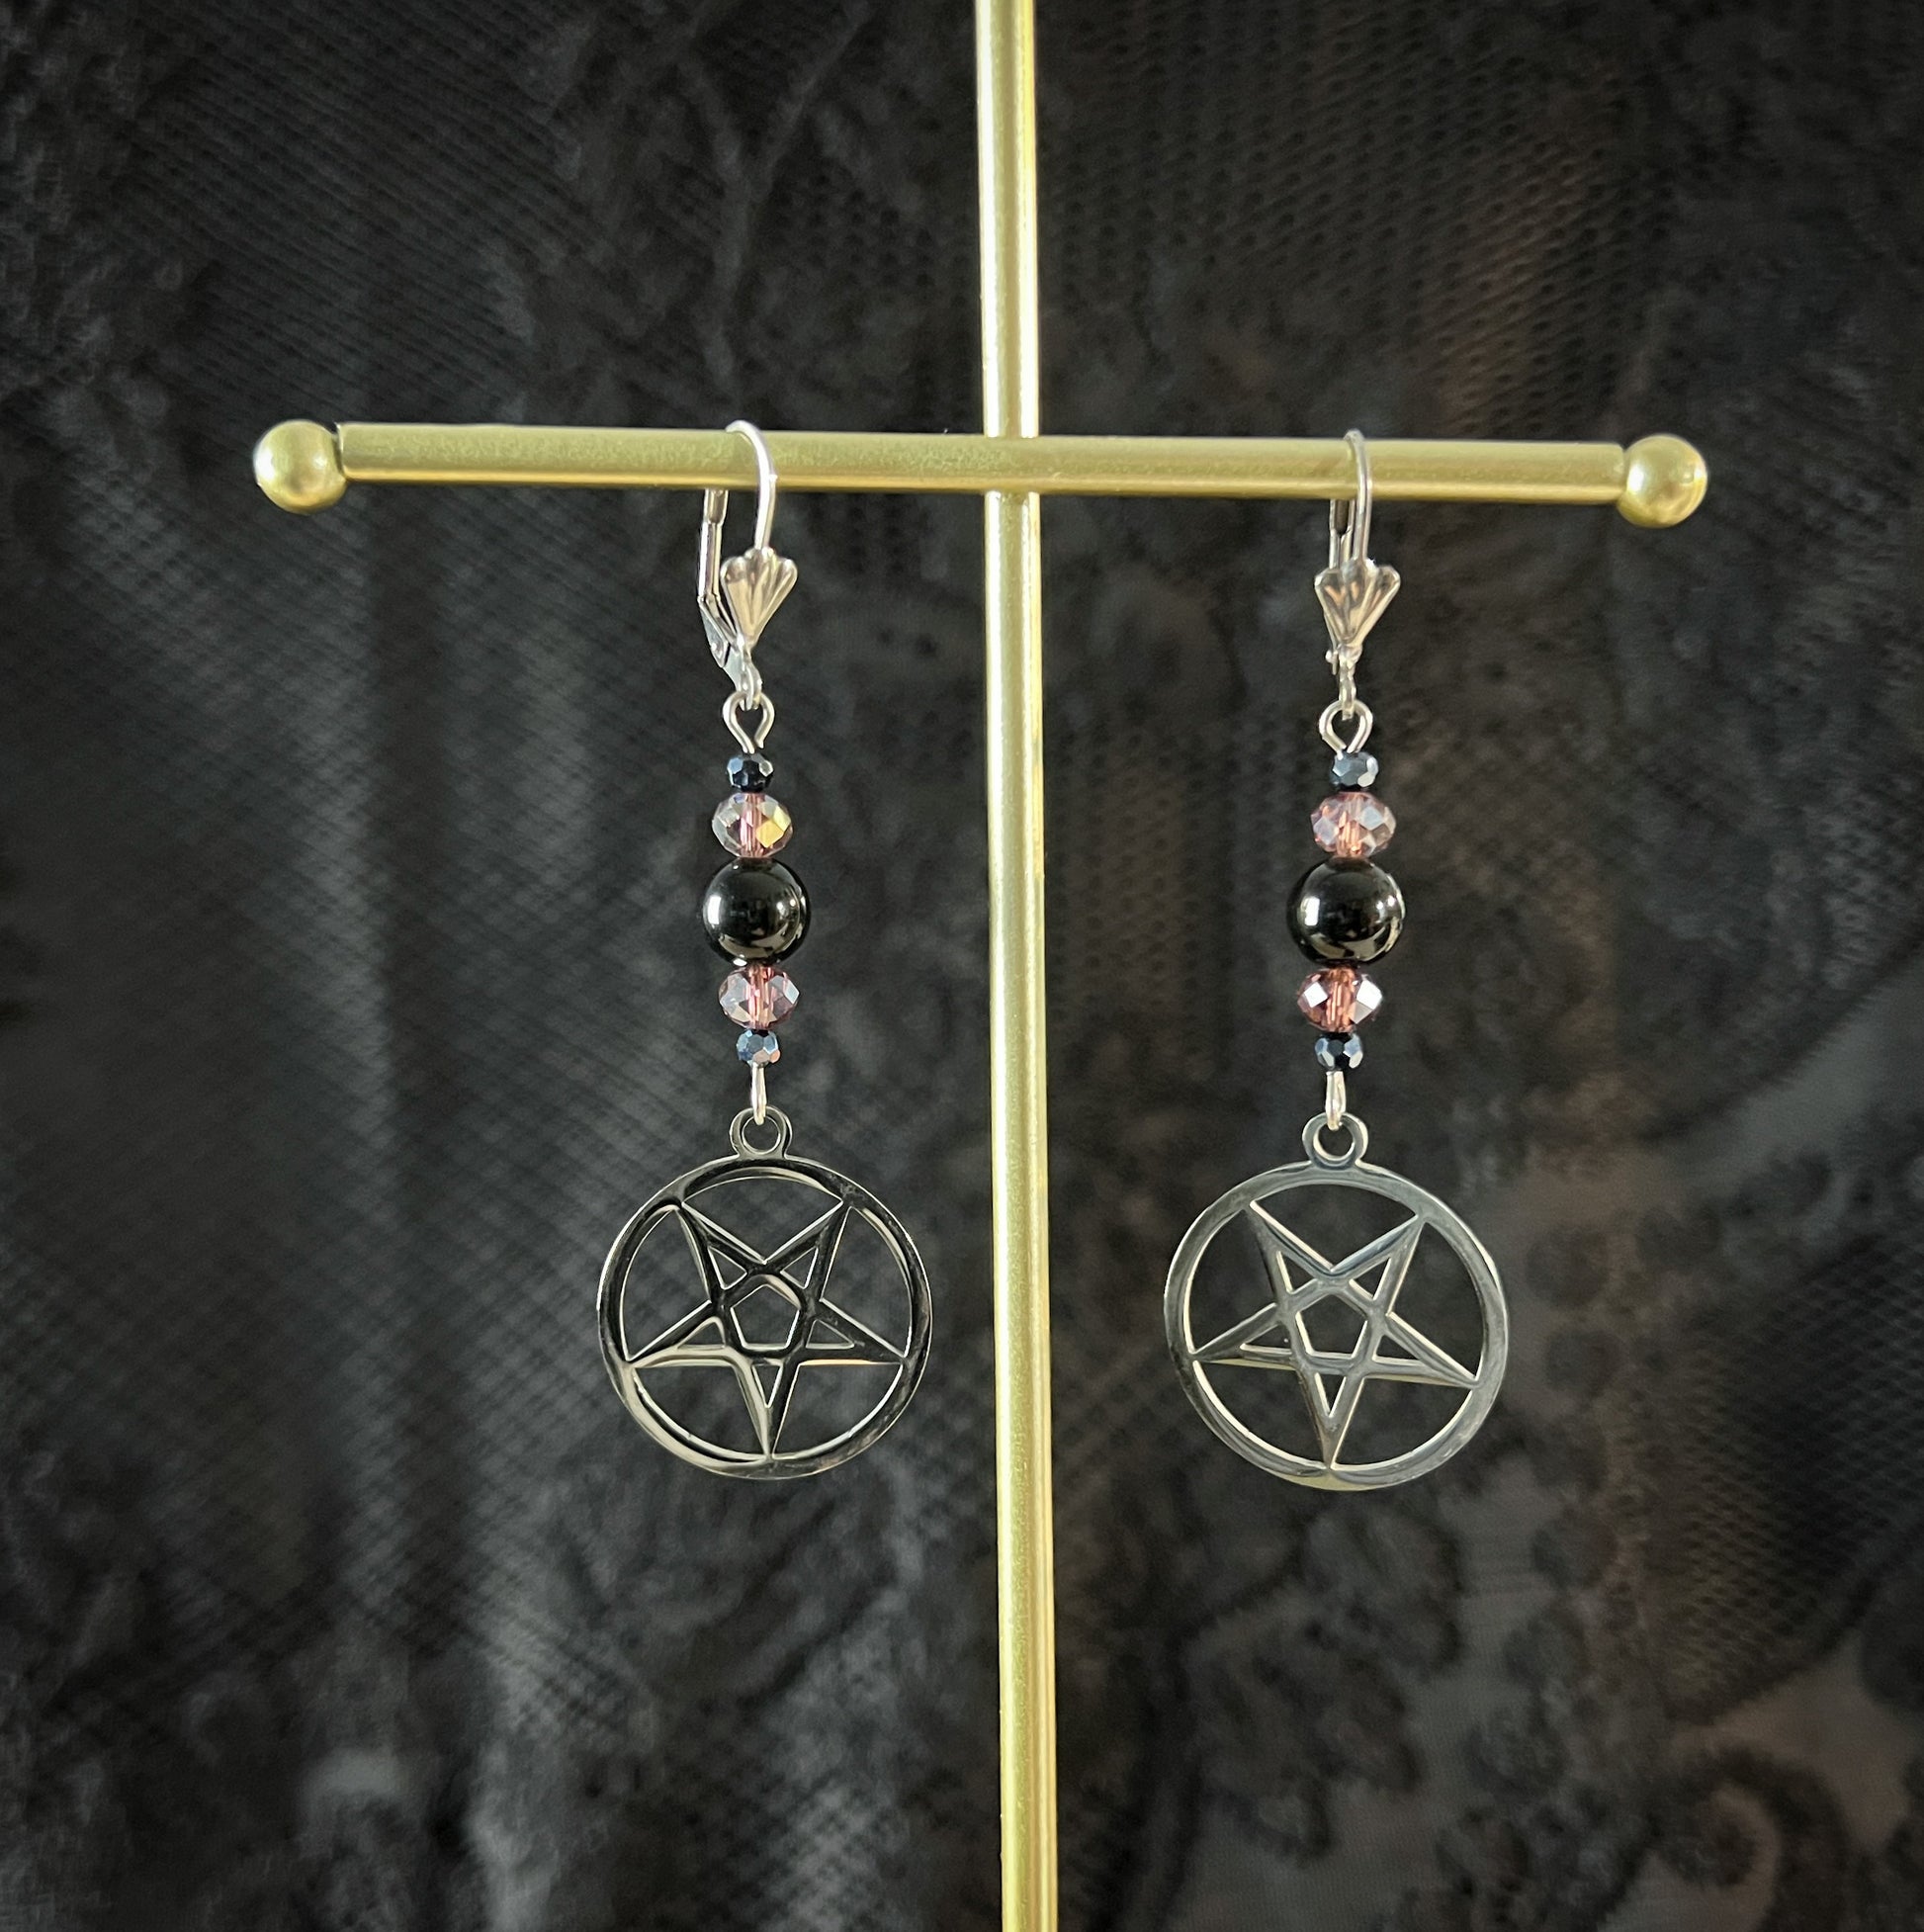 Witchcraft inverted pentacle earrings stainless steel obsidian and austrian crystal occult gothic jewelry Luciferian jewellery